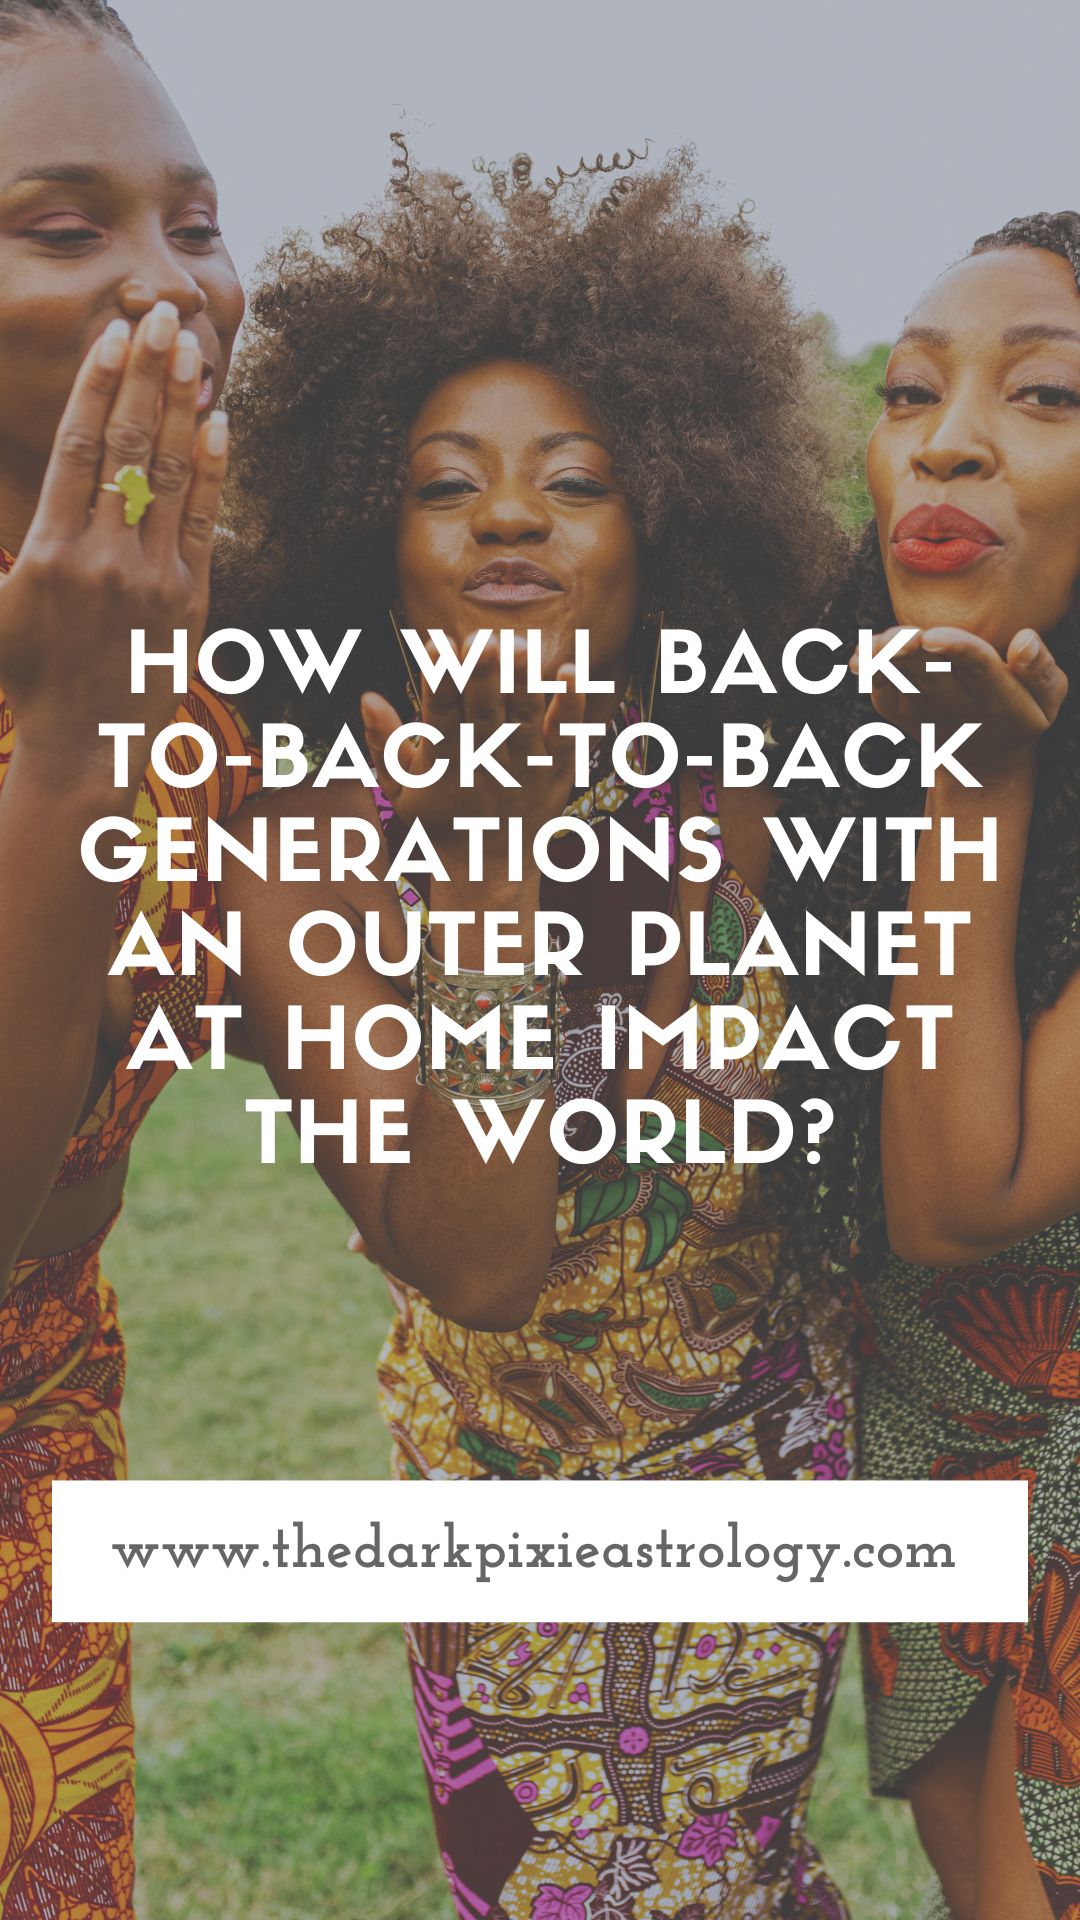 How Will Back-to-Back-to-Back Generations With an Outer Planet at Home Impact the World? - The Dark Pixie Astrology